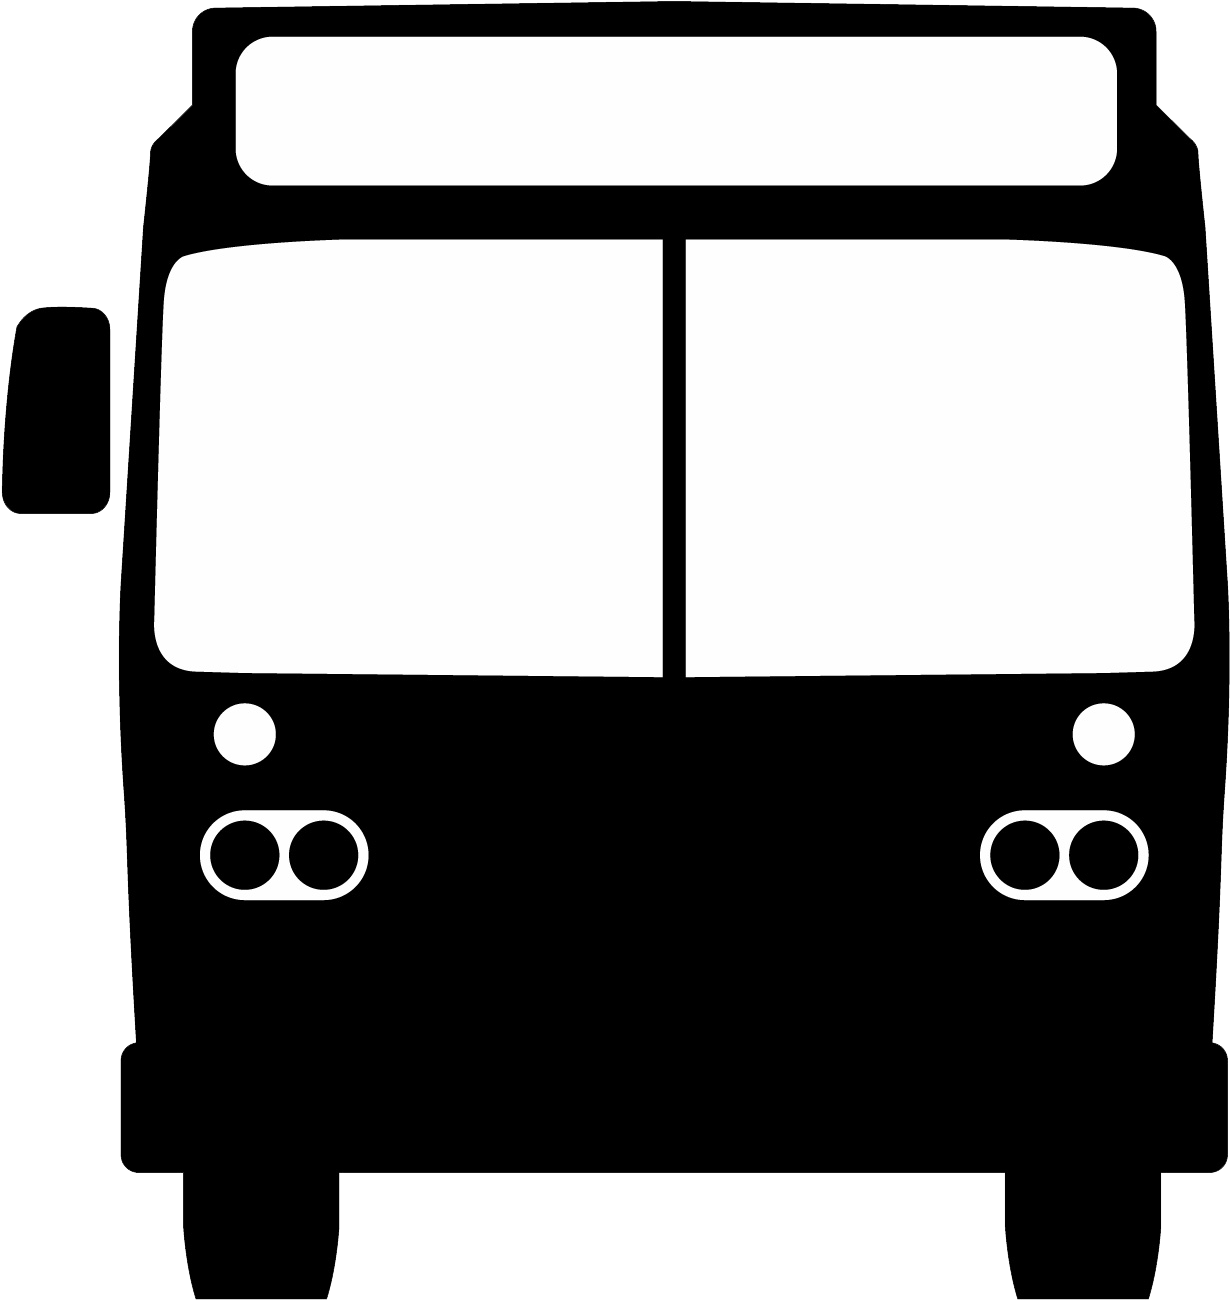 Download High Resolution Version For Print - Graphic Image Of Bus (1341x1409)